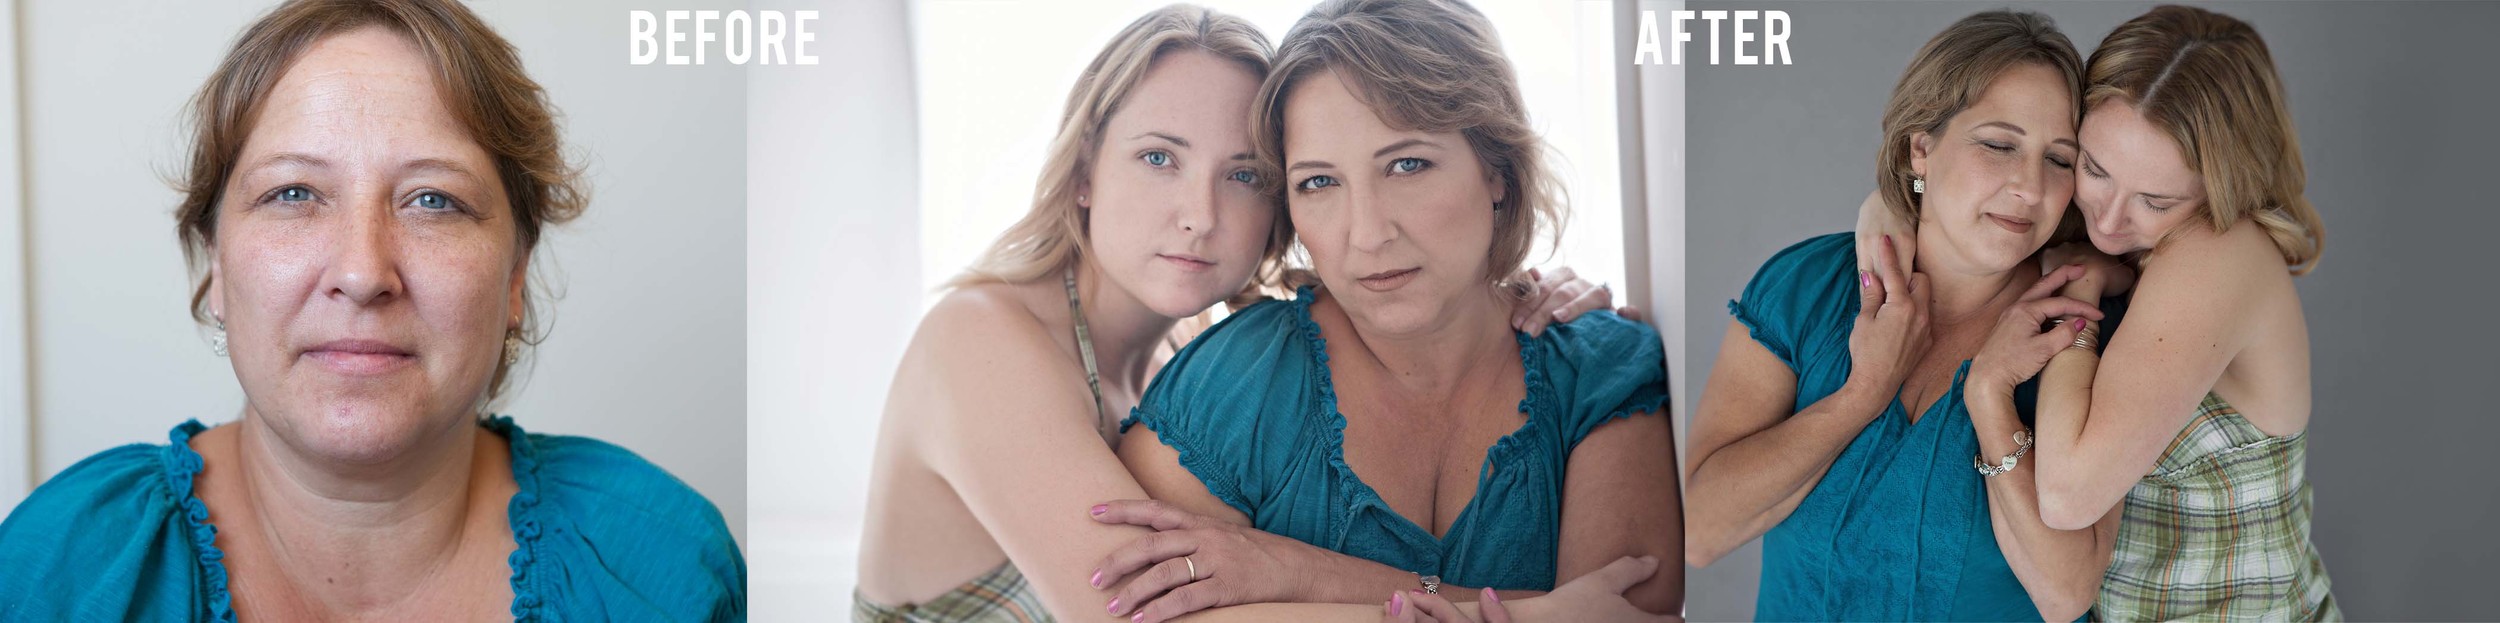 Mother and Daughter pose for Before and After photos in Leesburg, Virginia at a Professional Photography Studio